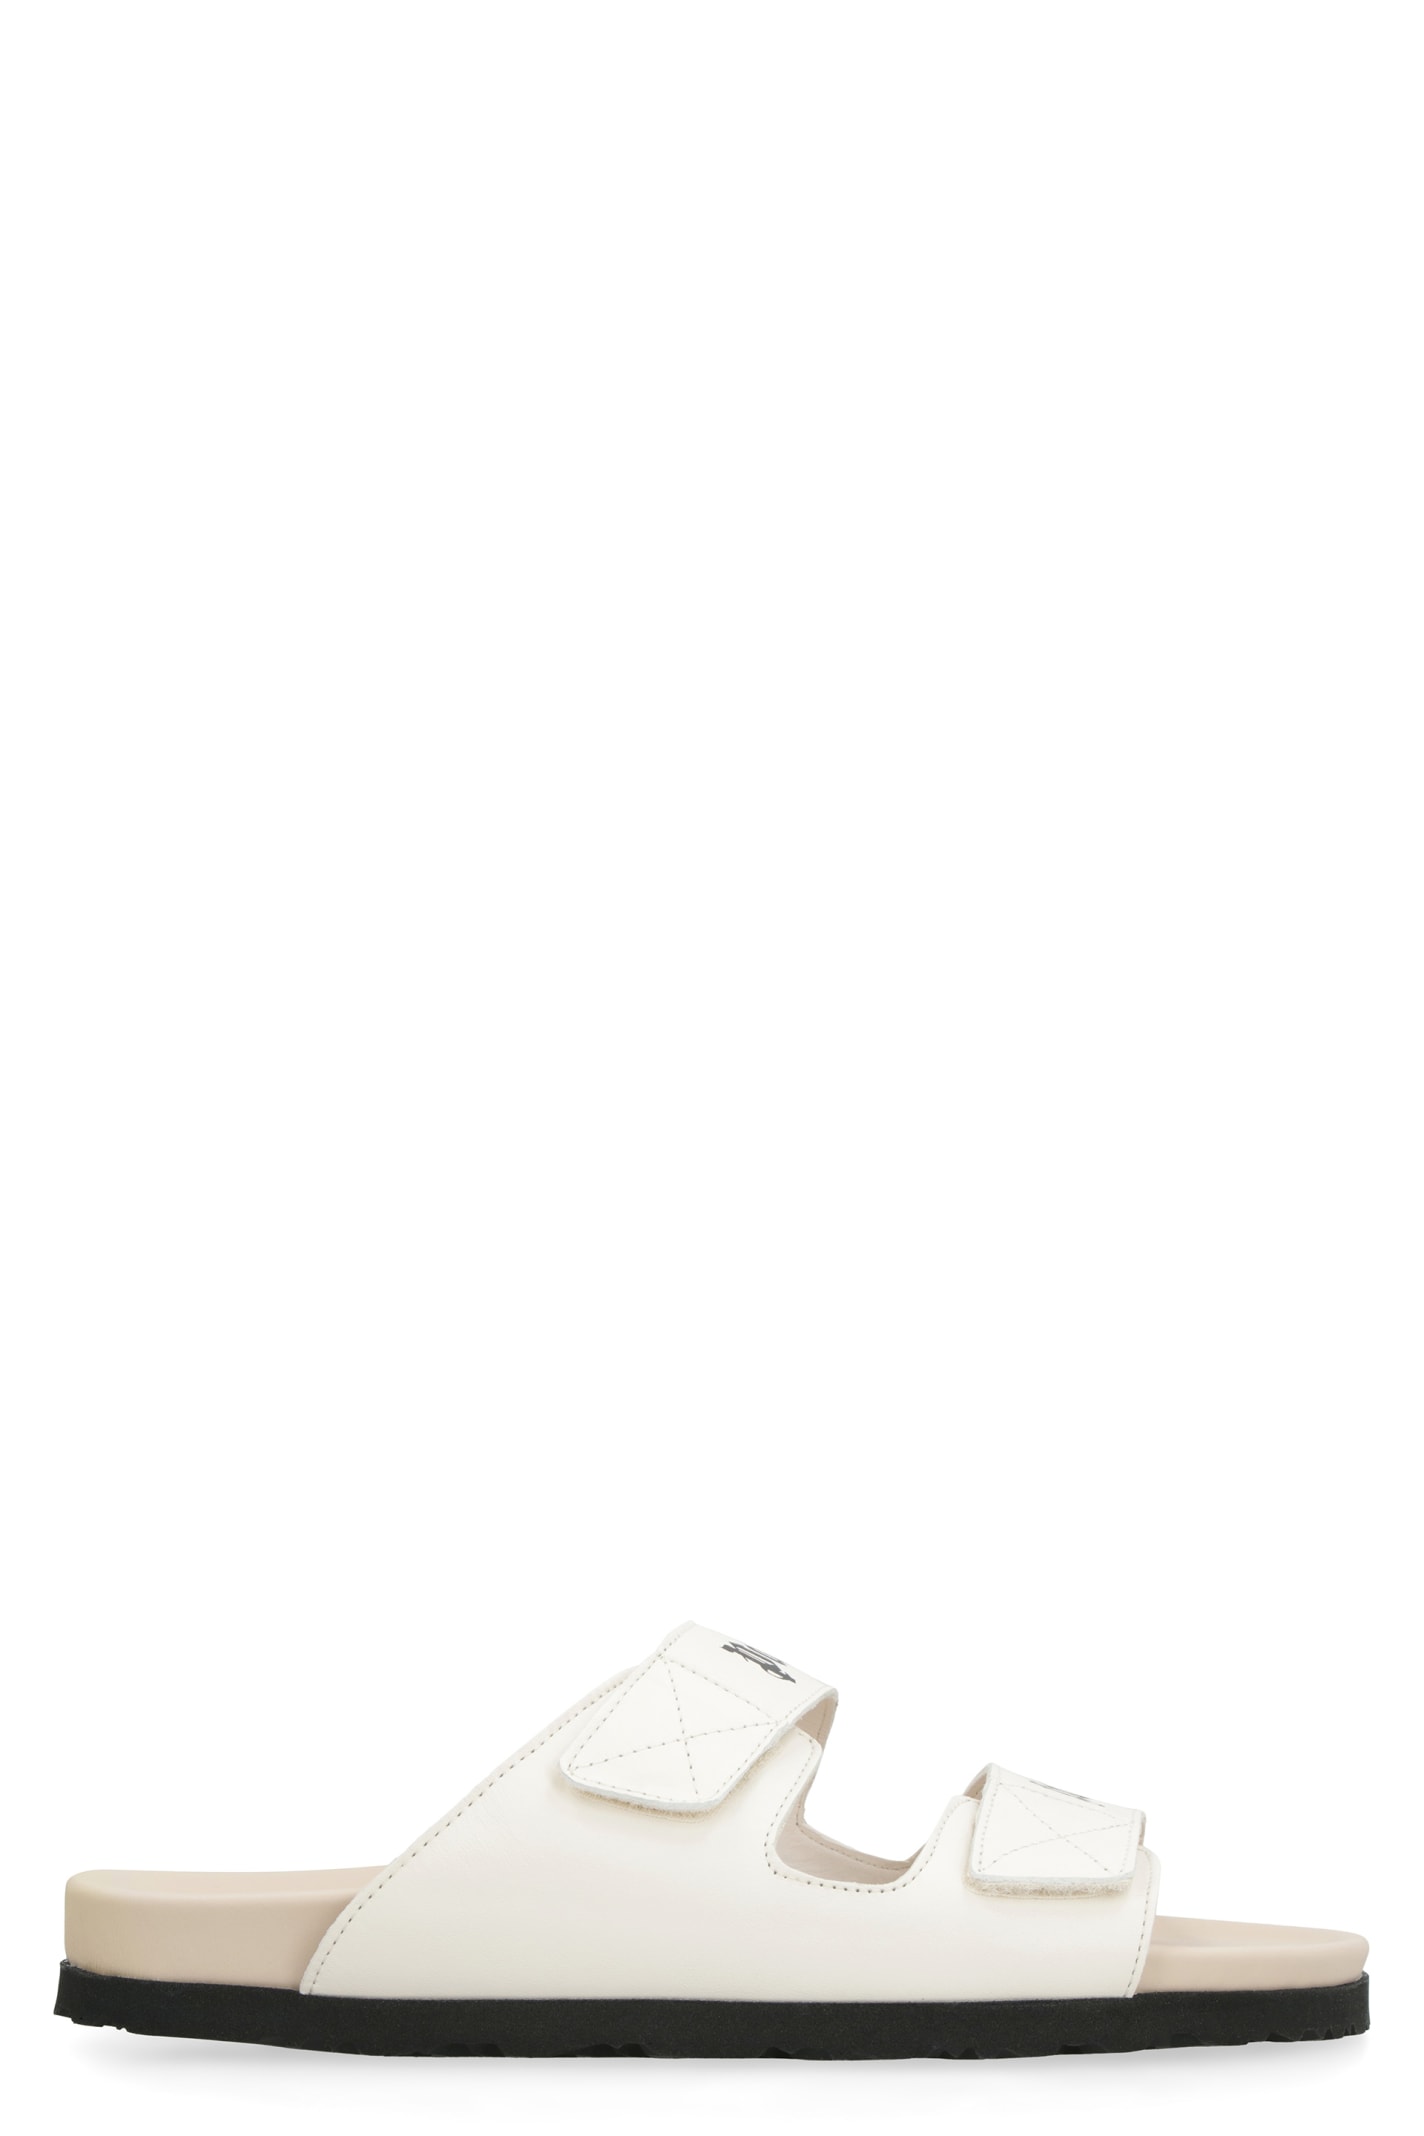 Palm Angels Leather Slides With Logo In Off White Beige